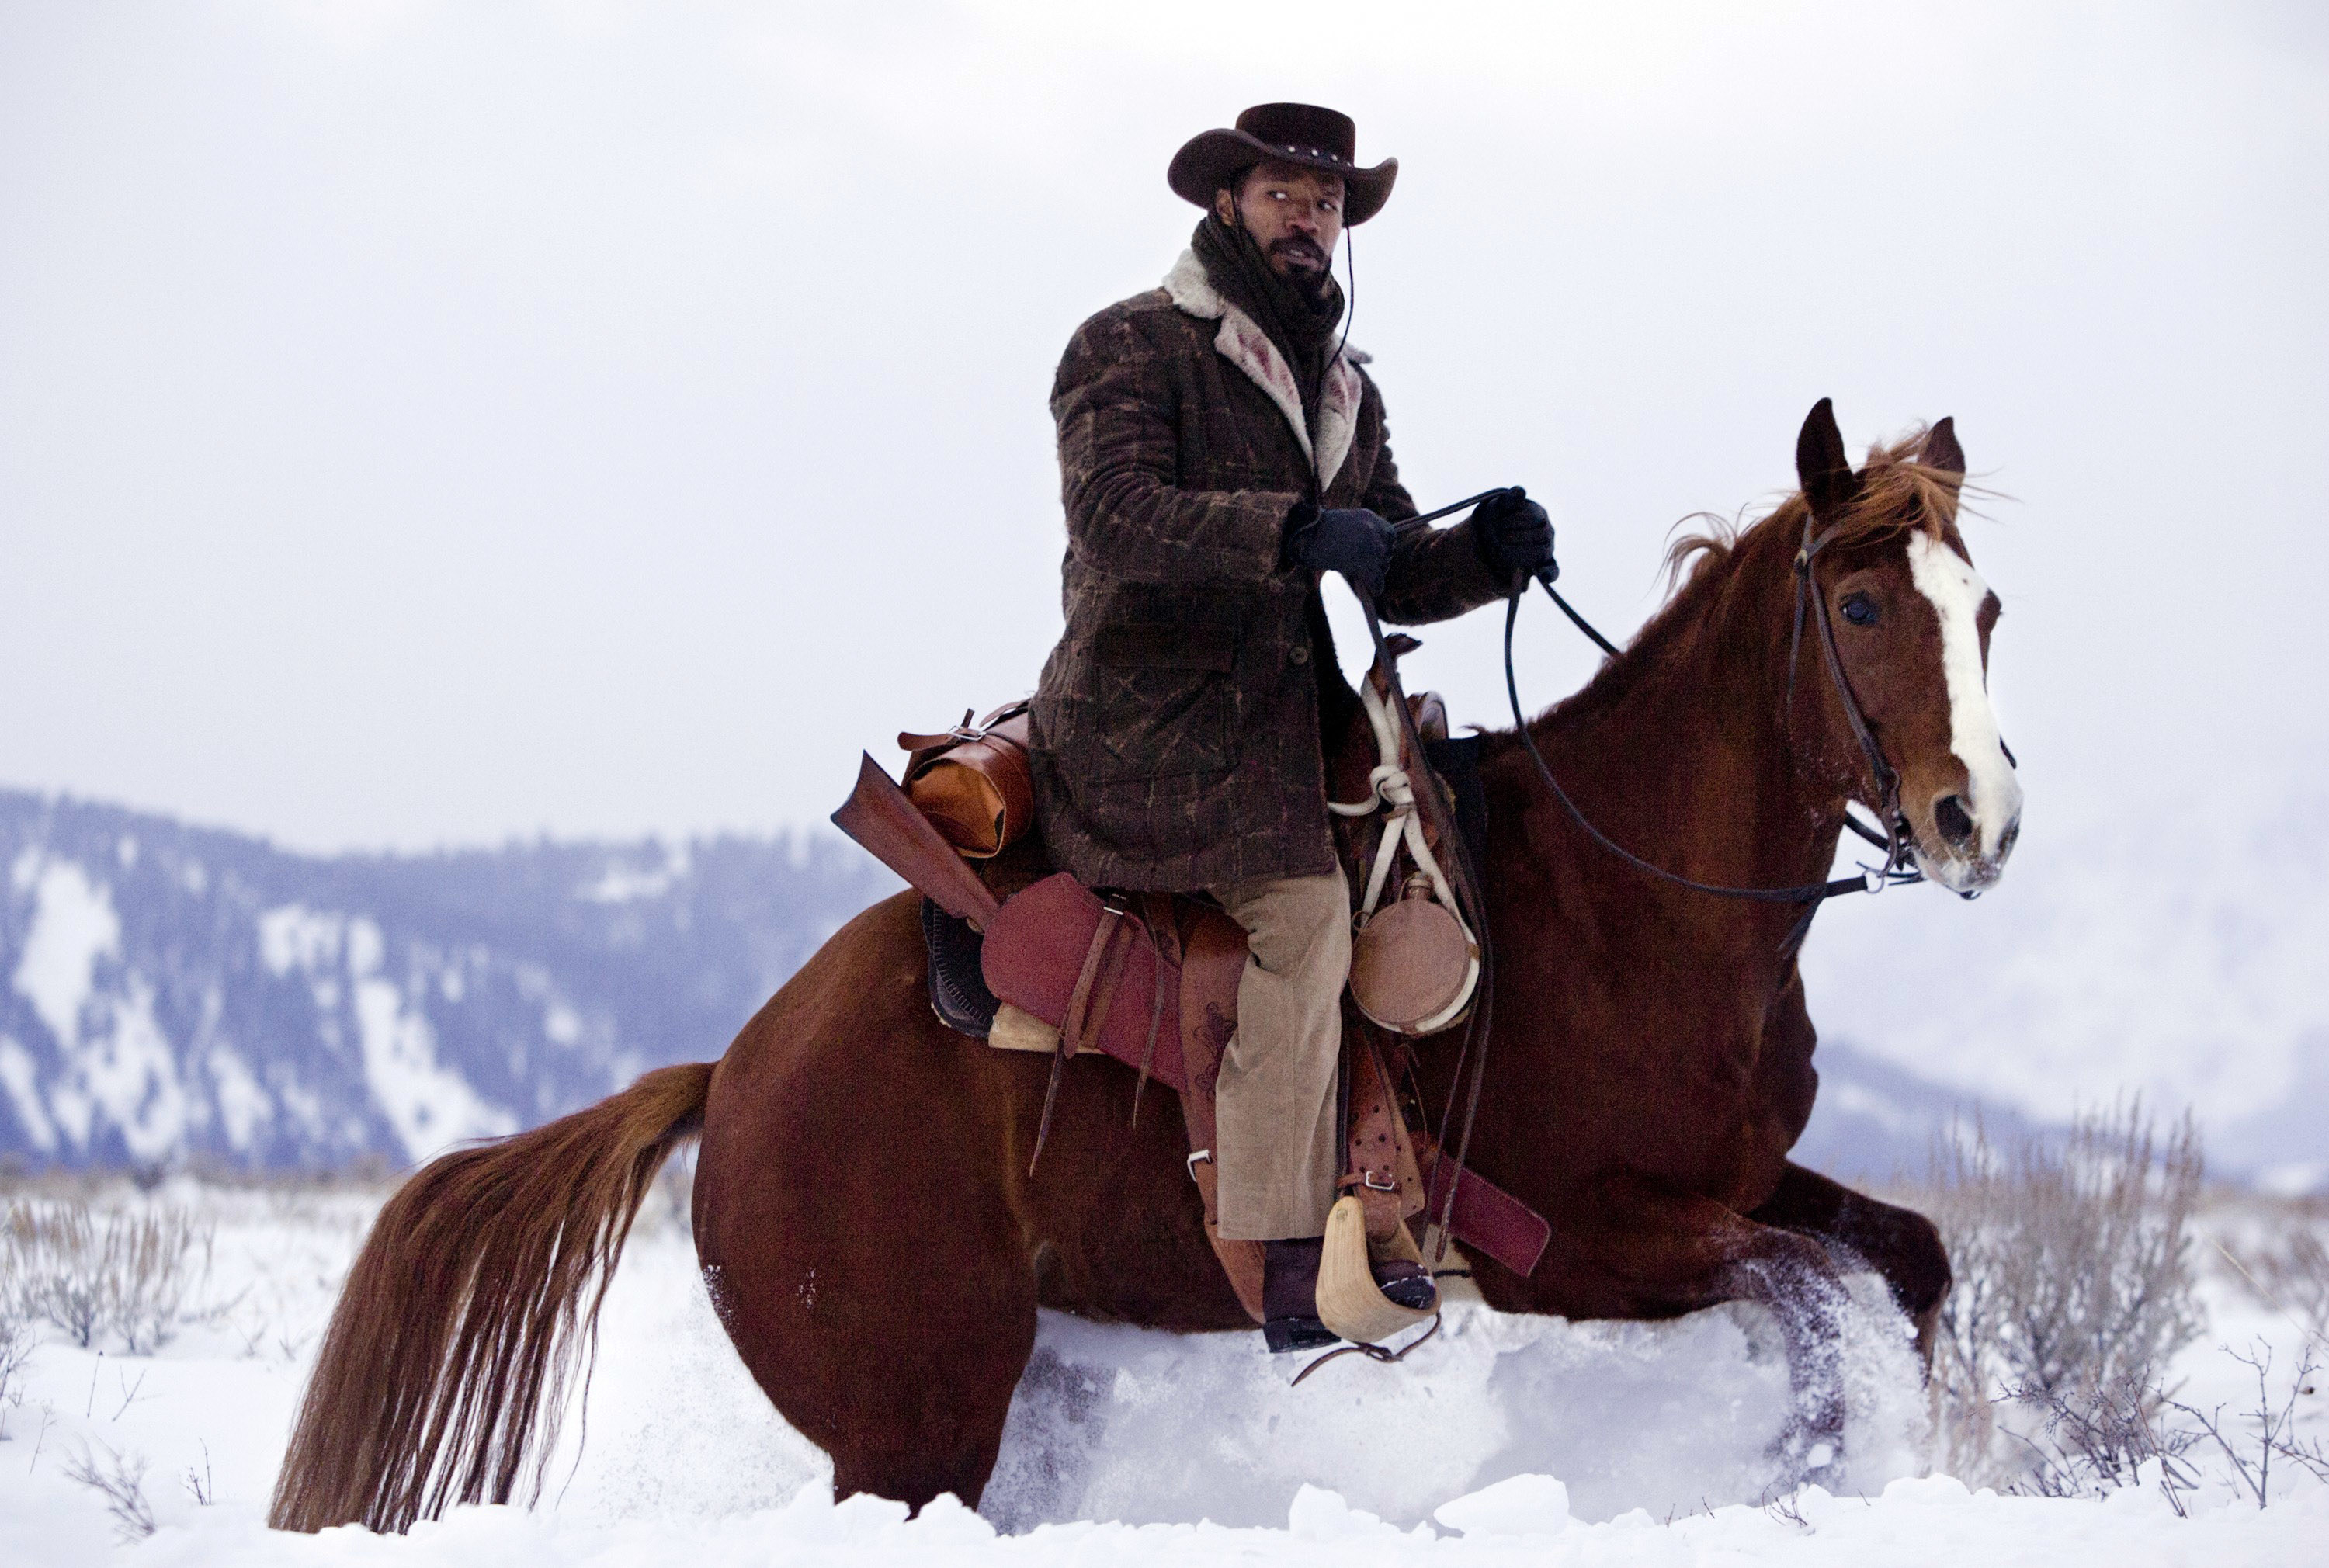 Jamie Foxx rides a horse through the snow in &quot;Django Unchained&quot;